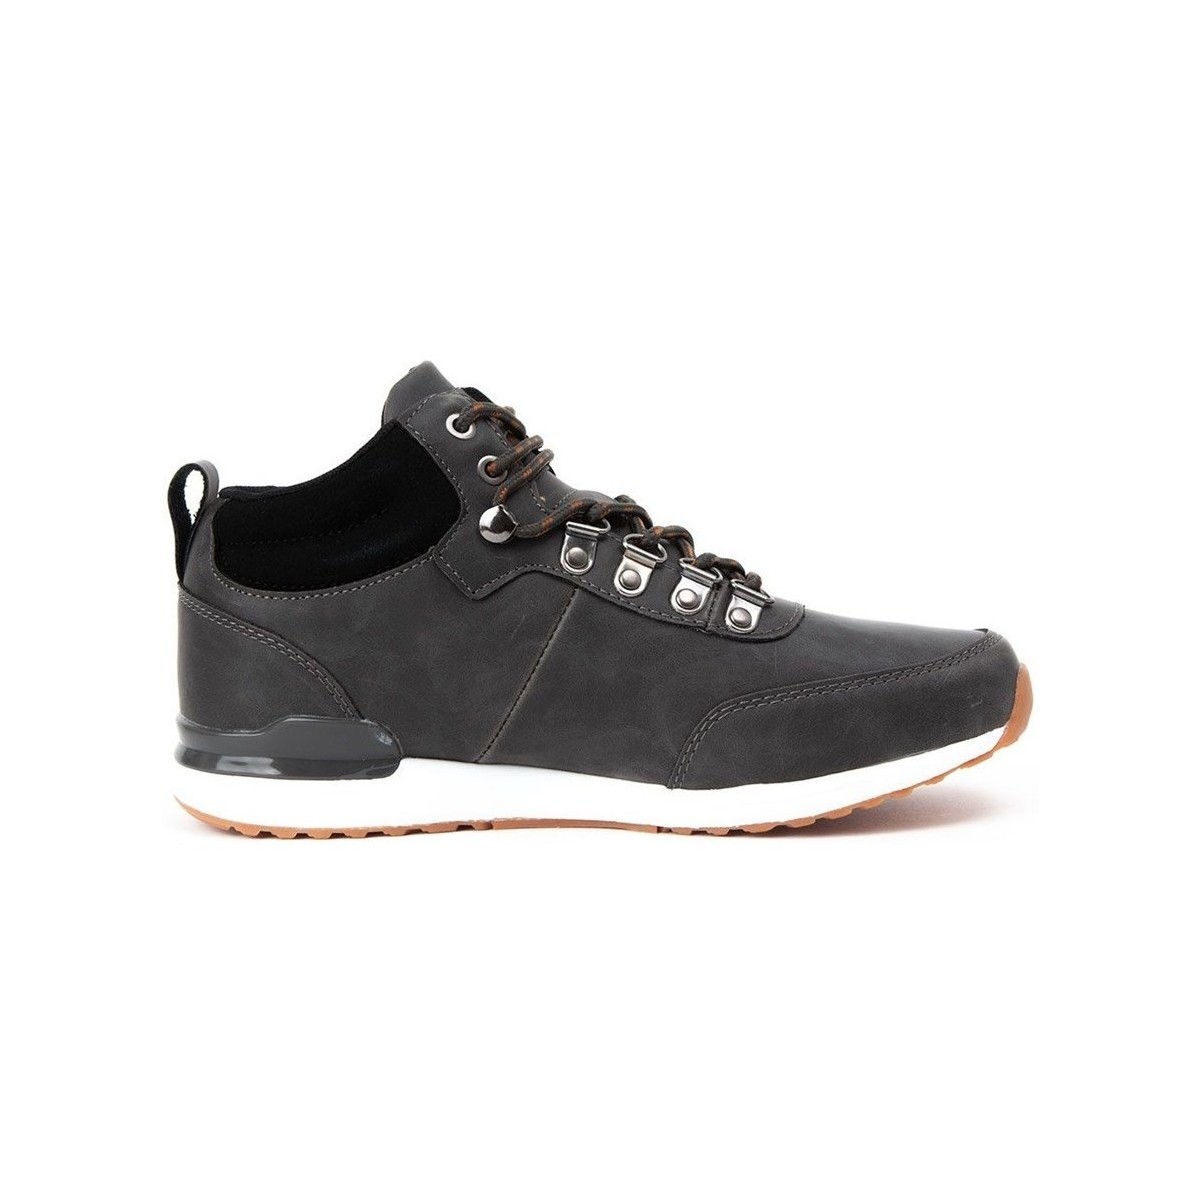 Chaussures Homme Boots Bustagrip Jogger Graphite